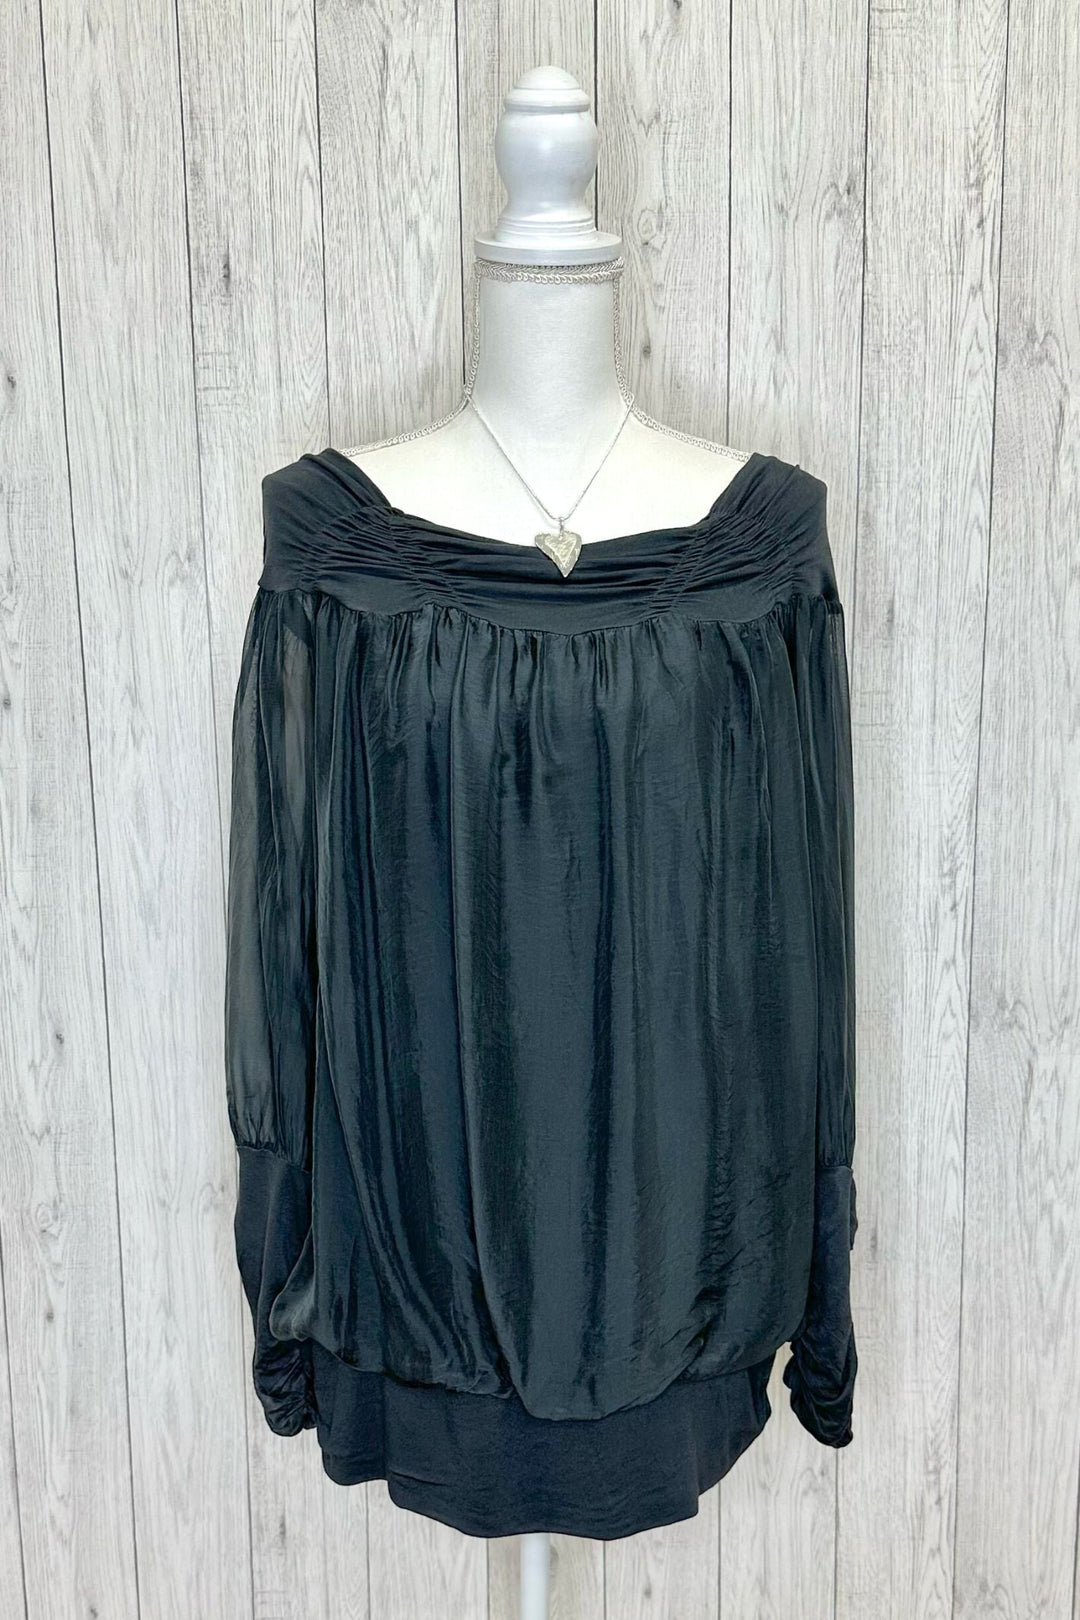 Philly Phase 8 Silk Top Charcoal - Sugarplum Boutique